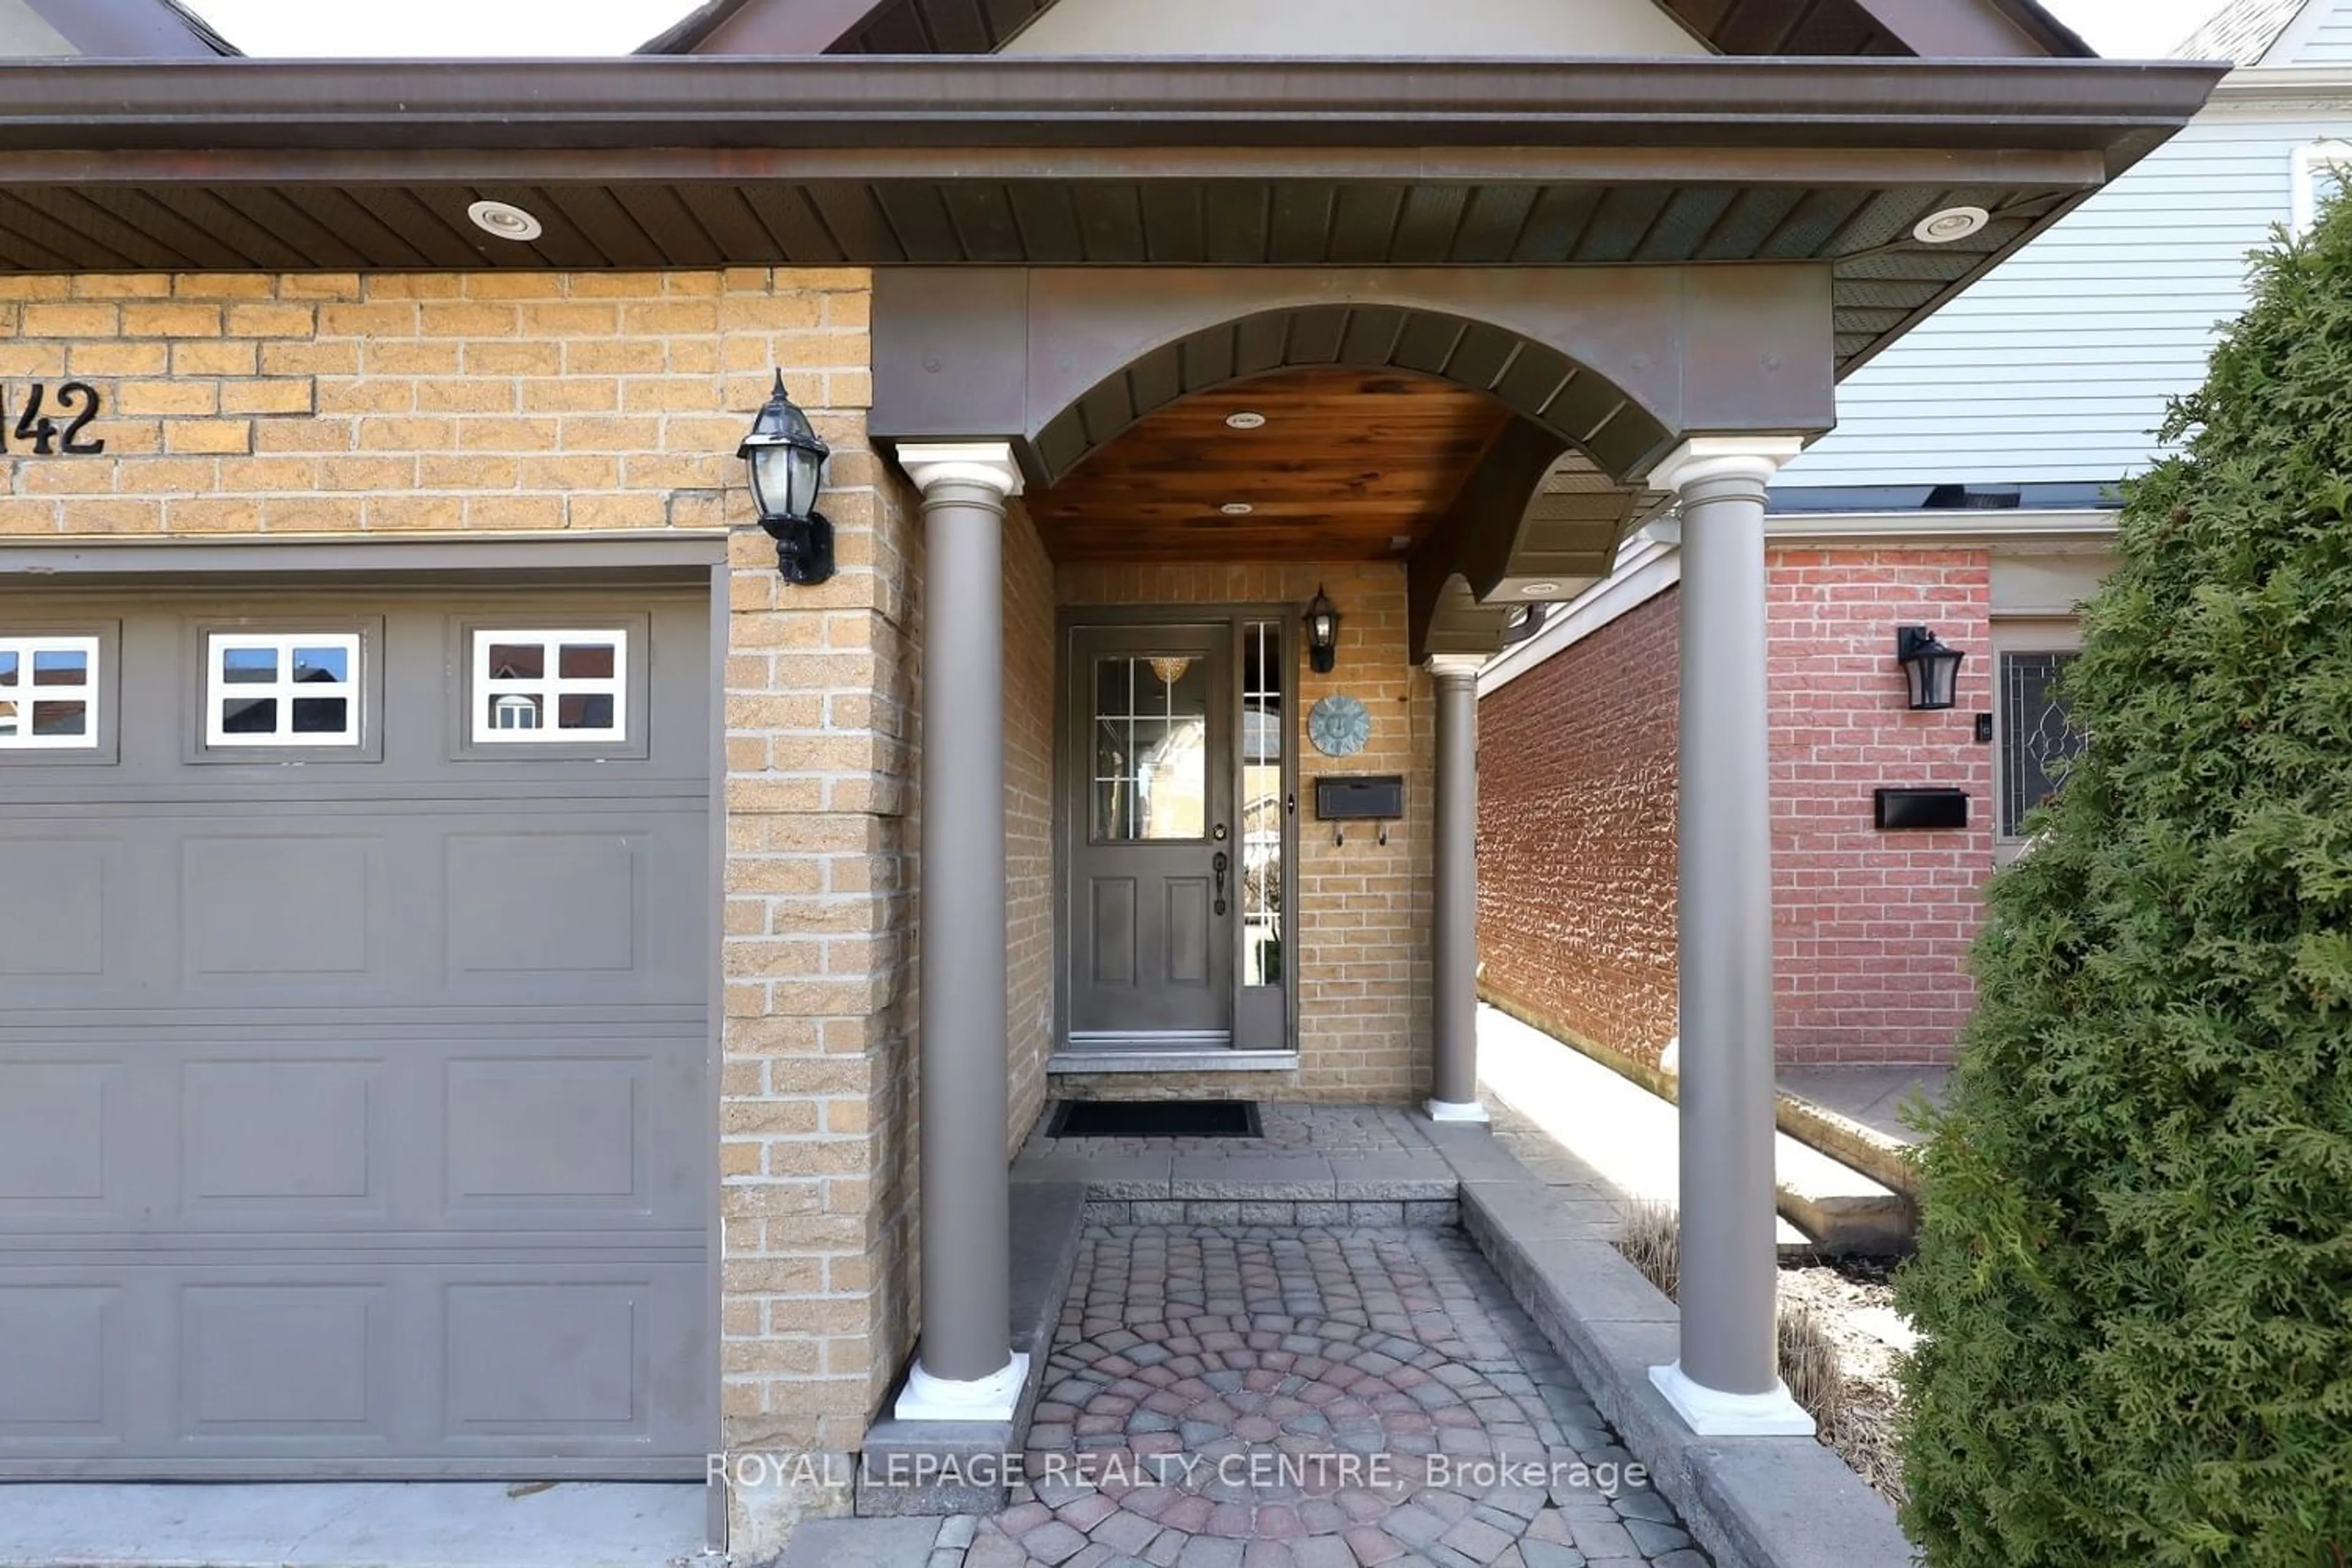 Home with brick exterior material for 4142 Quaker Hill Dr, Mississauga Ontario L5C 3M3